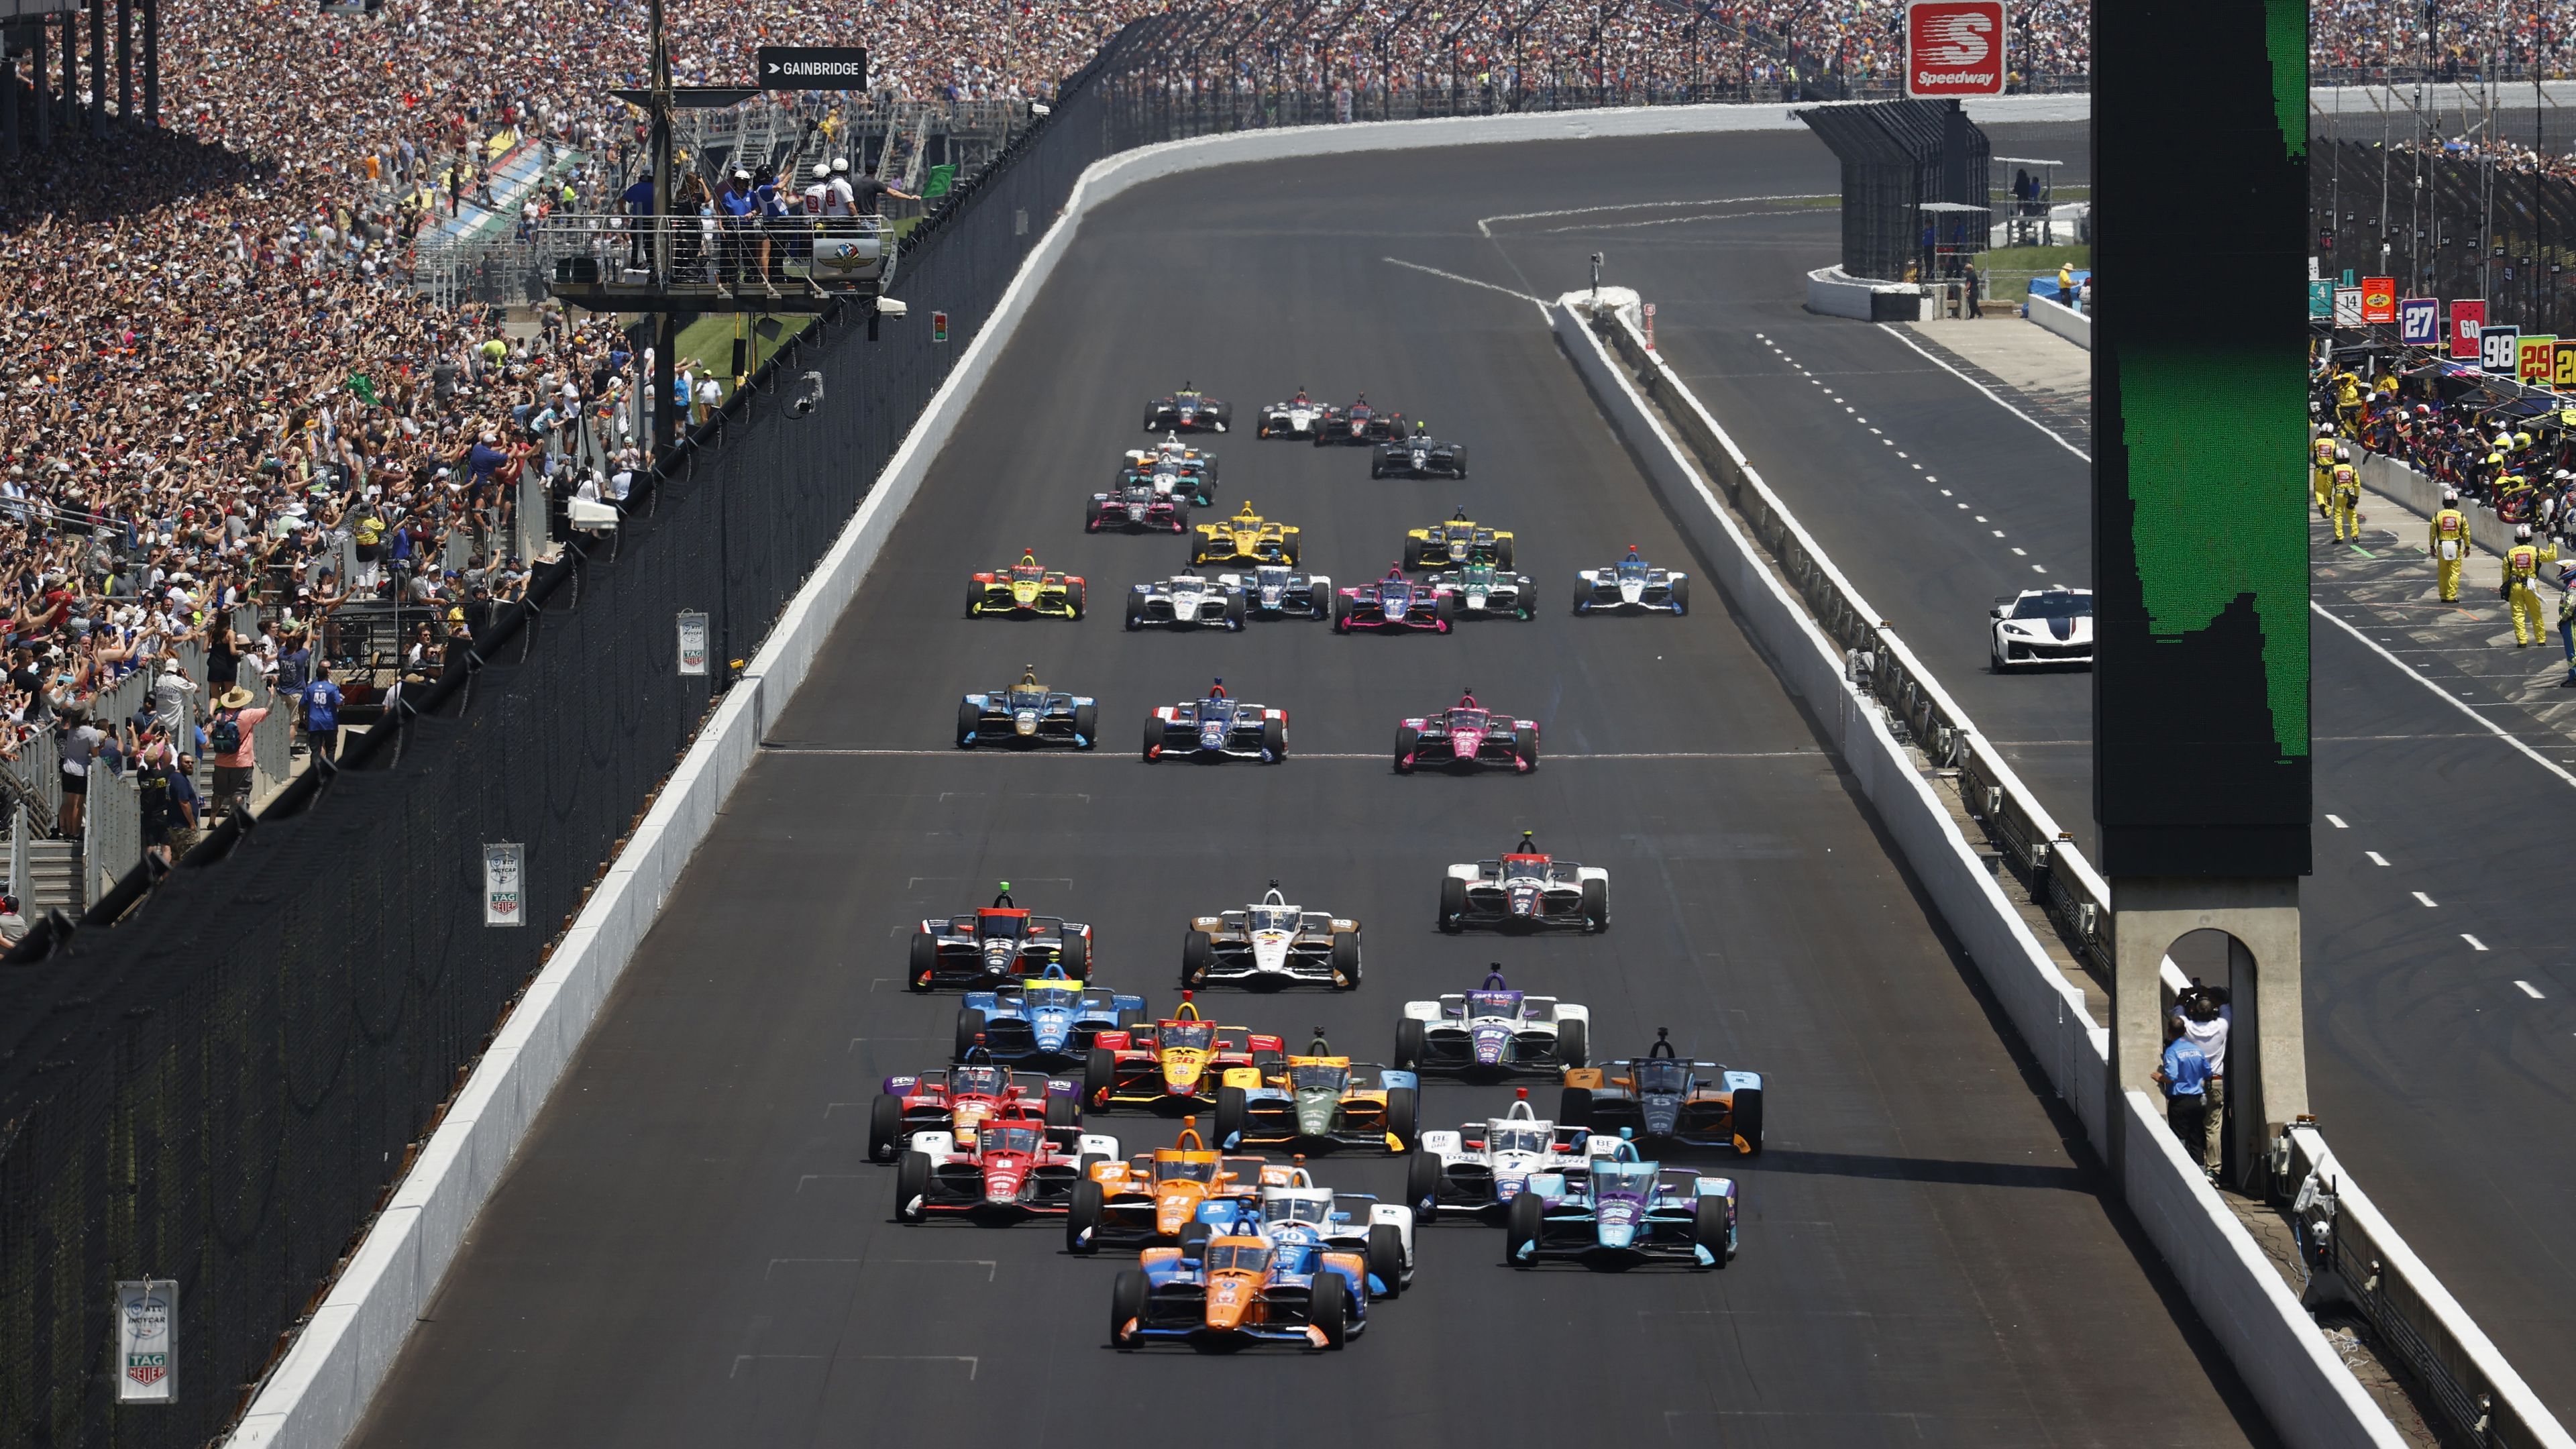 Scott Dixon leads the field into turn one at the 106th Indianapolis 500.